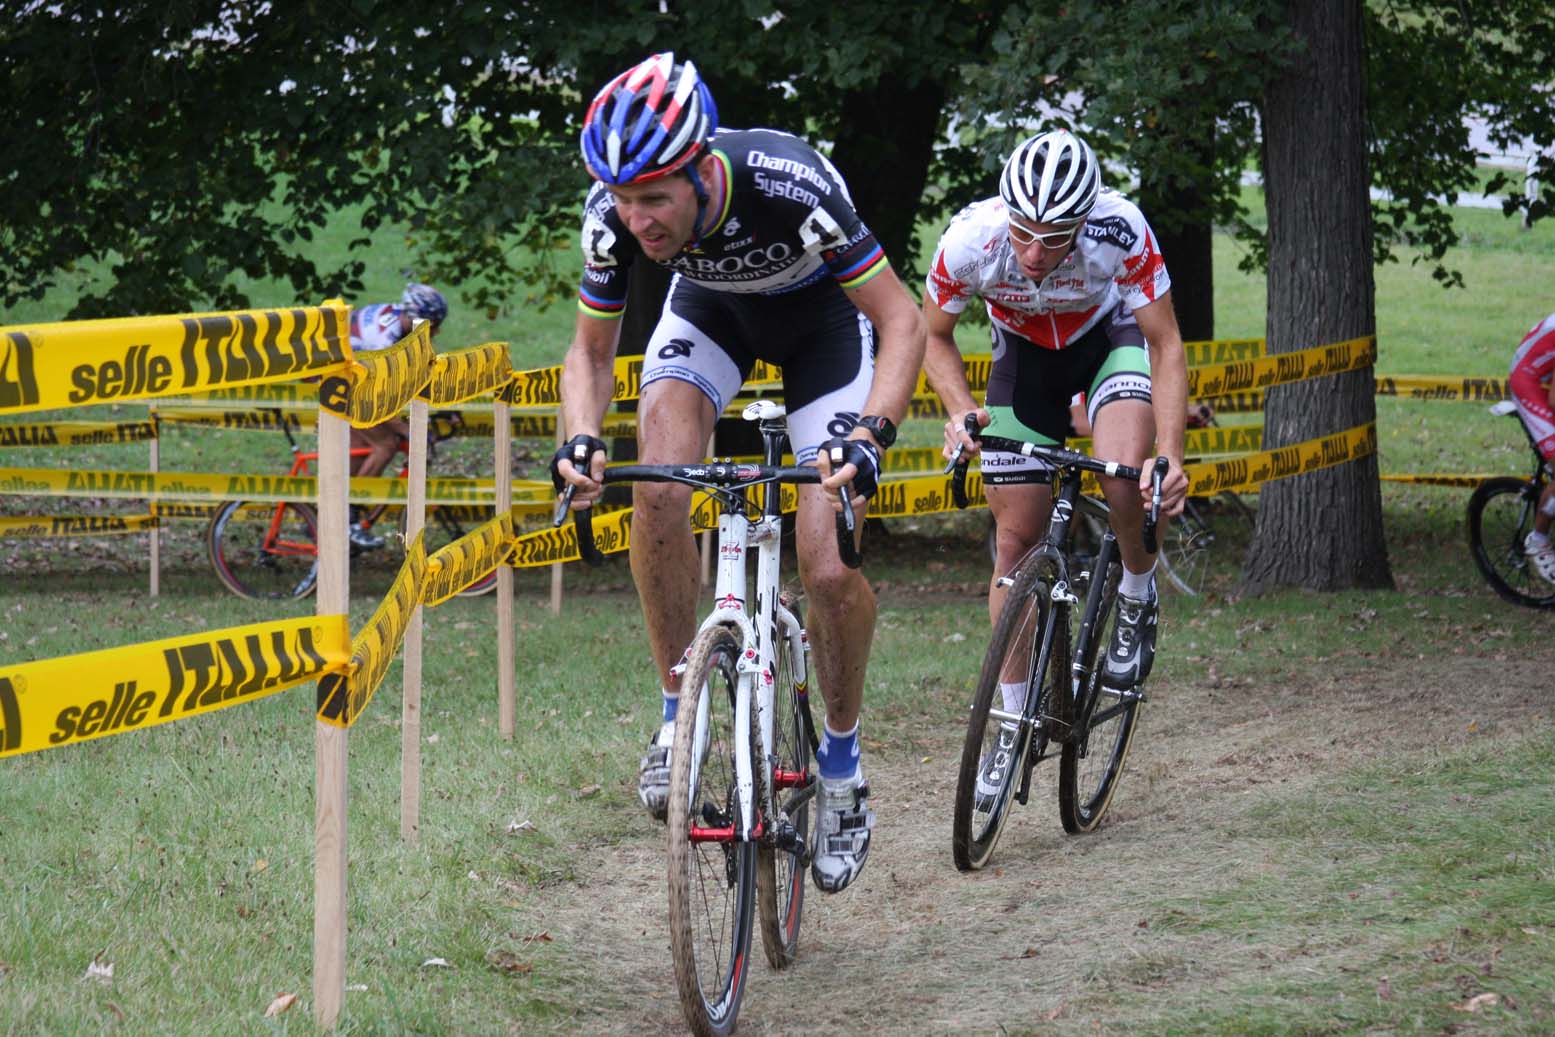 Erwin Vervecken (Revor-Babococ) and Jeremy Powers (Cannondale/Cyclocrossworld) were made to chase early. by Amy Dykema